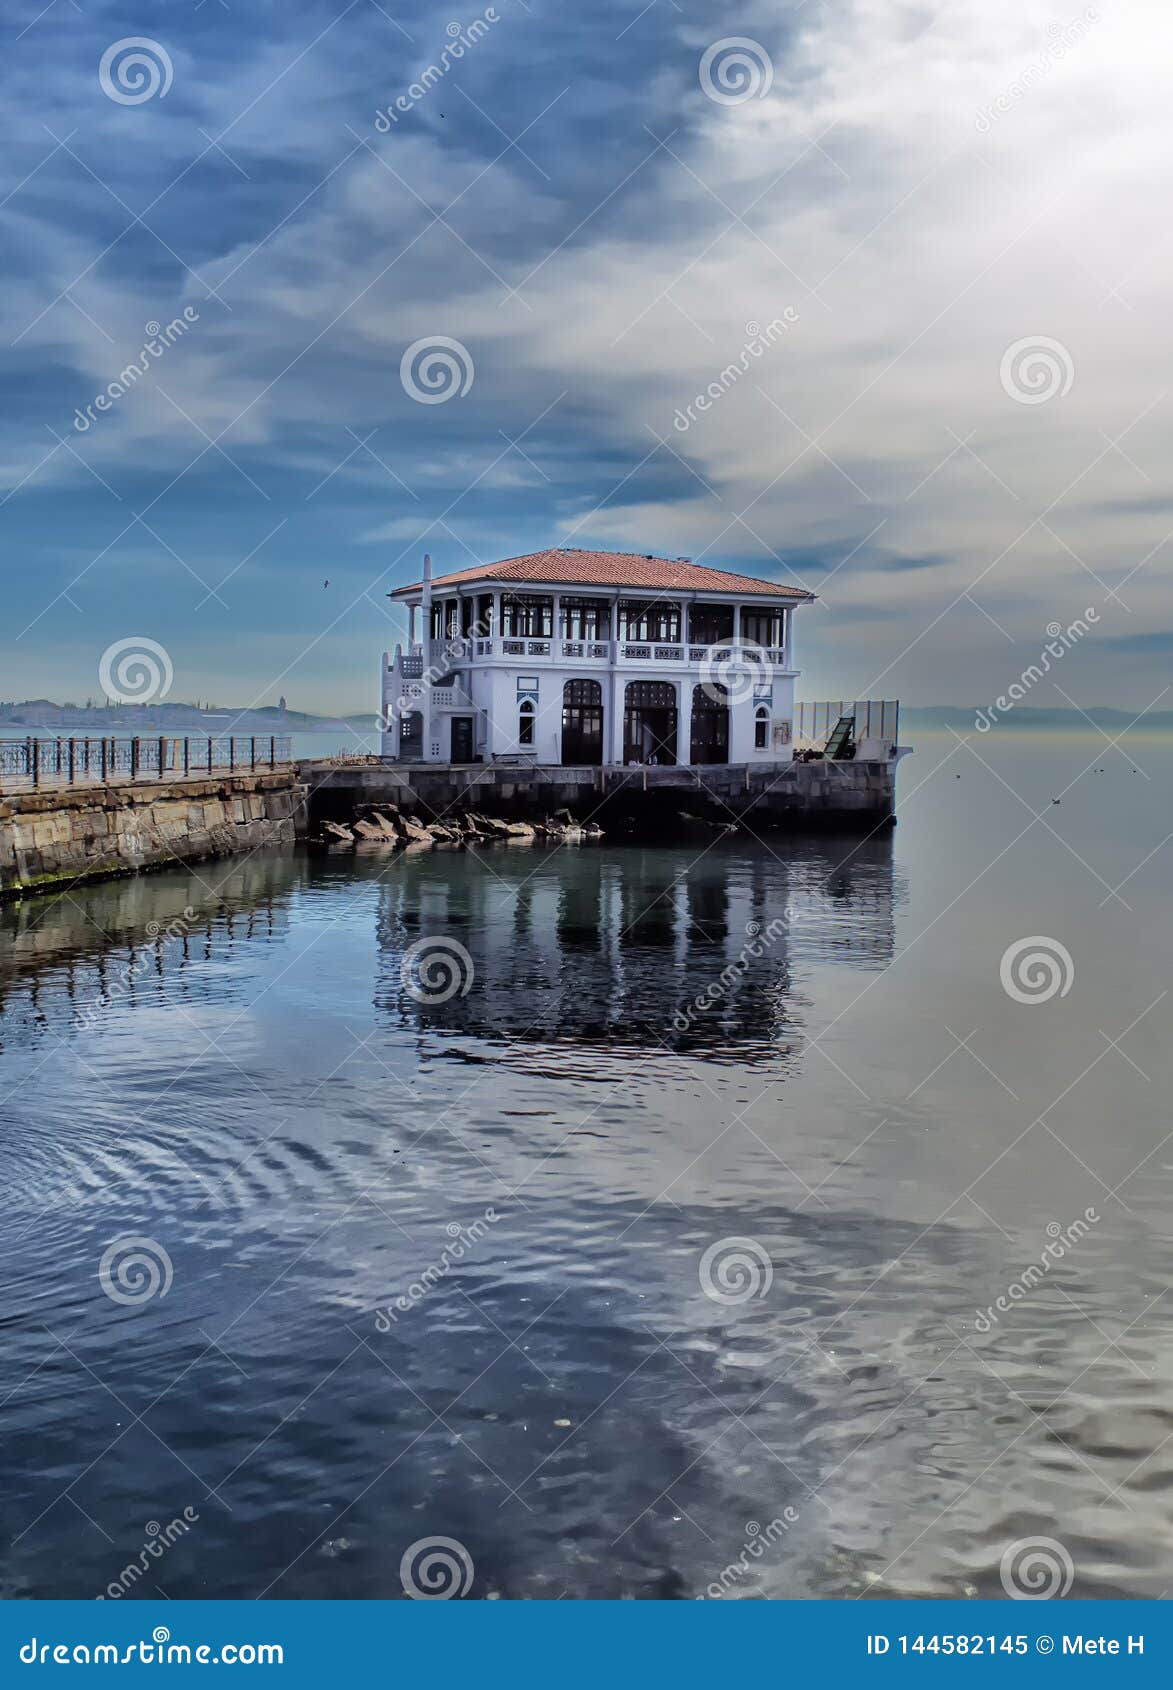 the building of a port for ships for city transport in istanula in a part of the city called moda and its reflections on the surfa